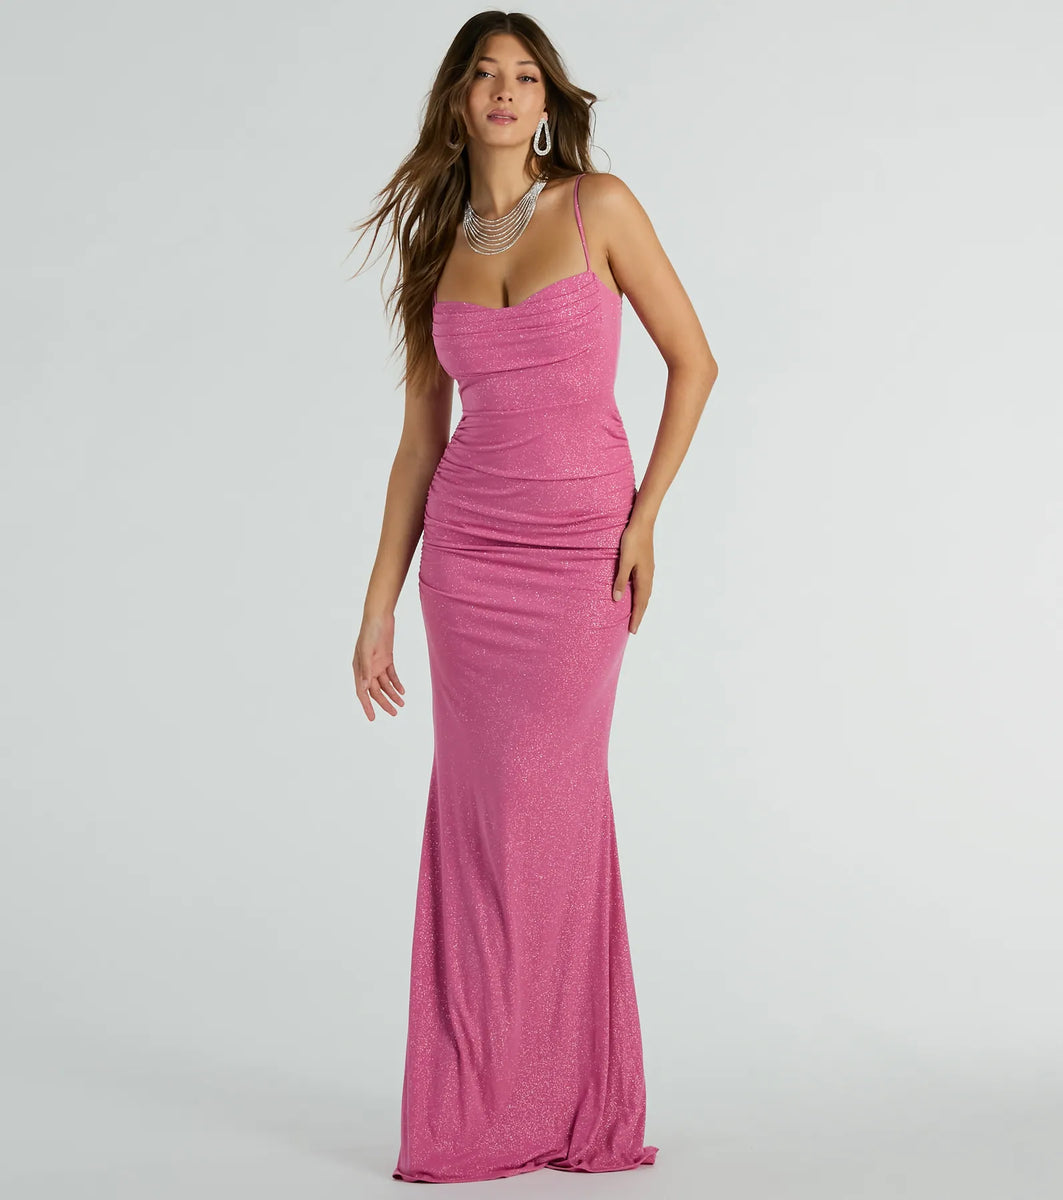 Ayanna Formal Glitter Ruched Mermaid Long Dress